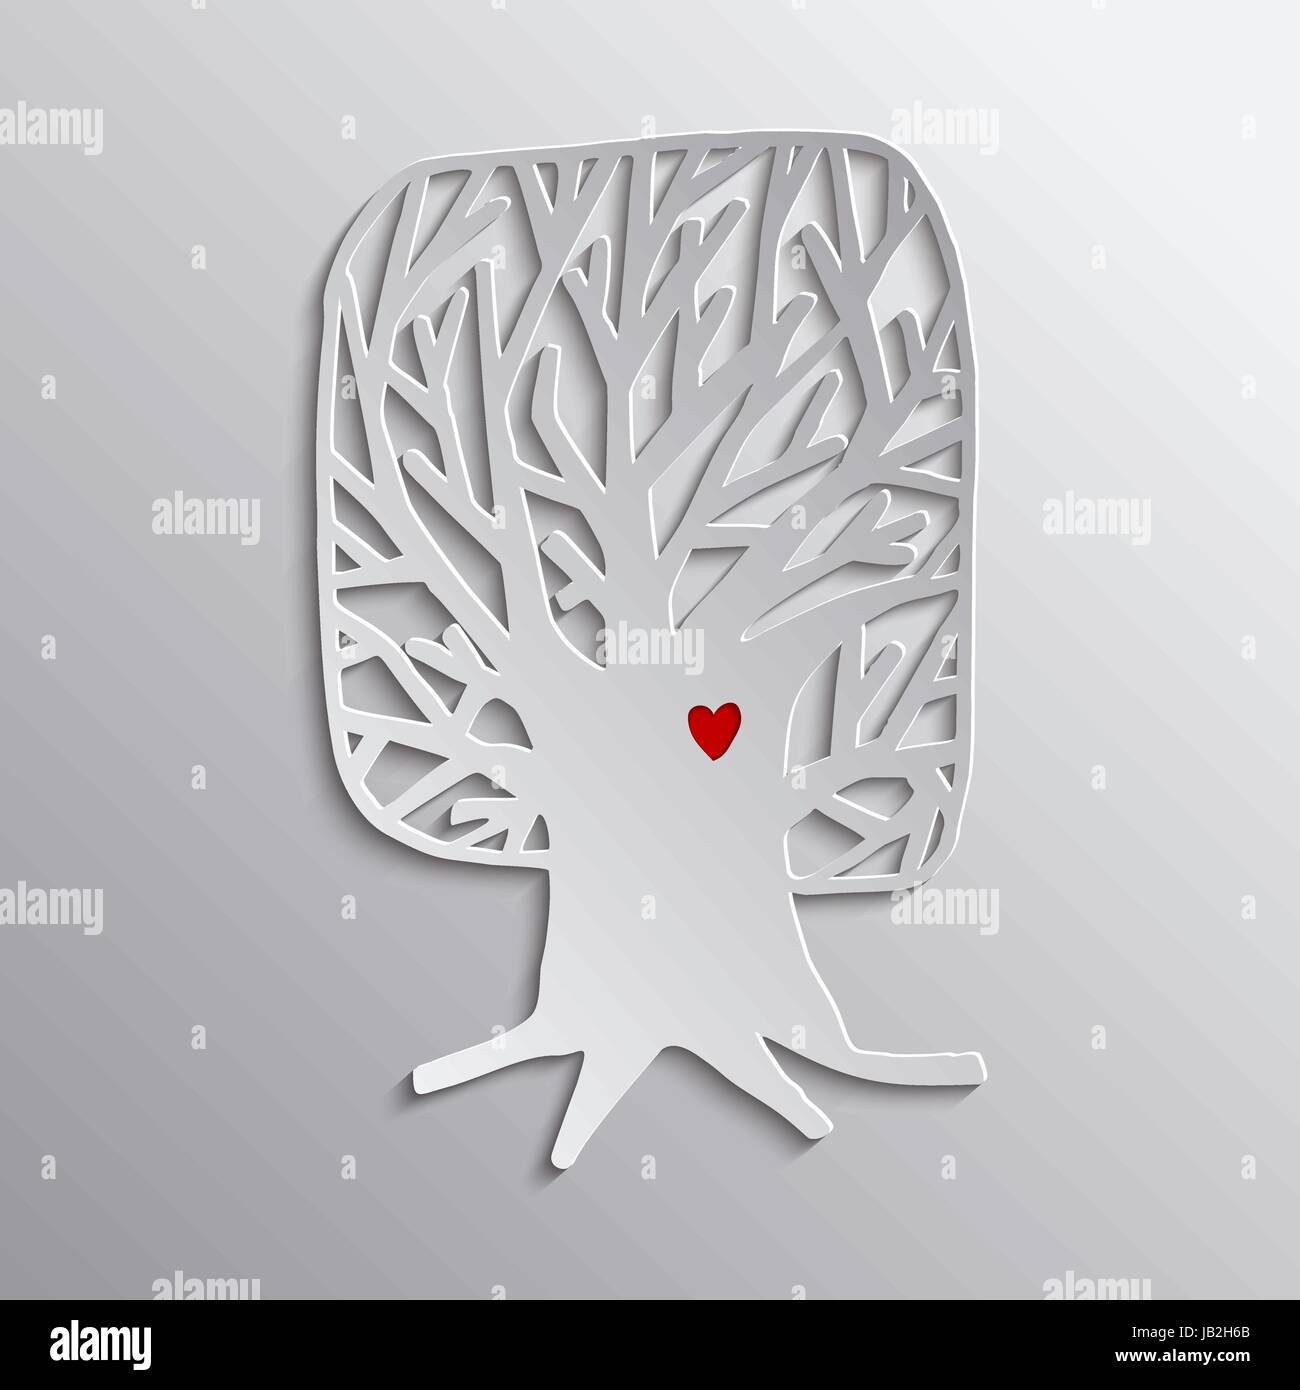 Tree love concept illustration, 3d cutout art for environment care or nature help project. EPS10 vector. Stock Vector